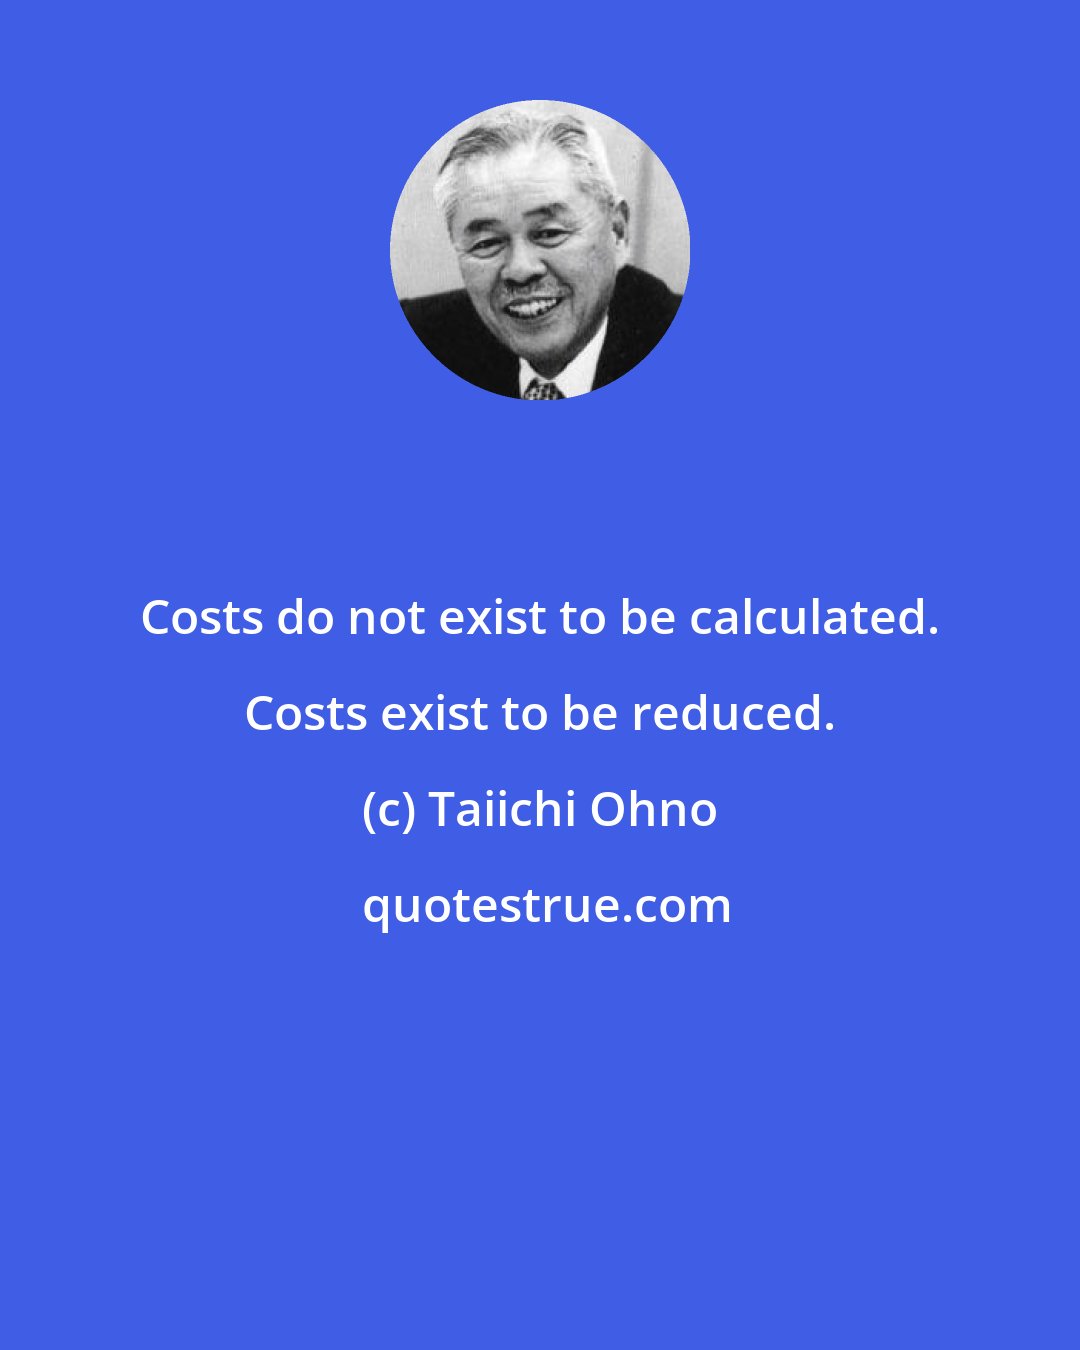 Taiichi Ohno: Costs do not exist to be calculated. Costs exist to be reduced.